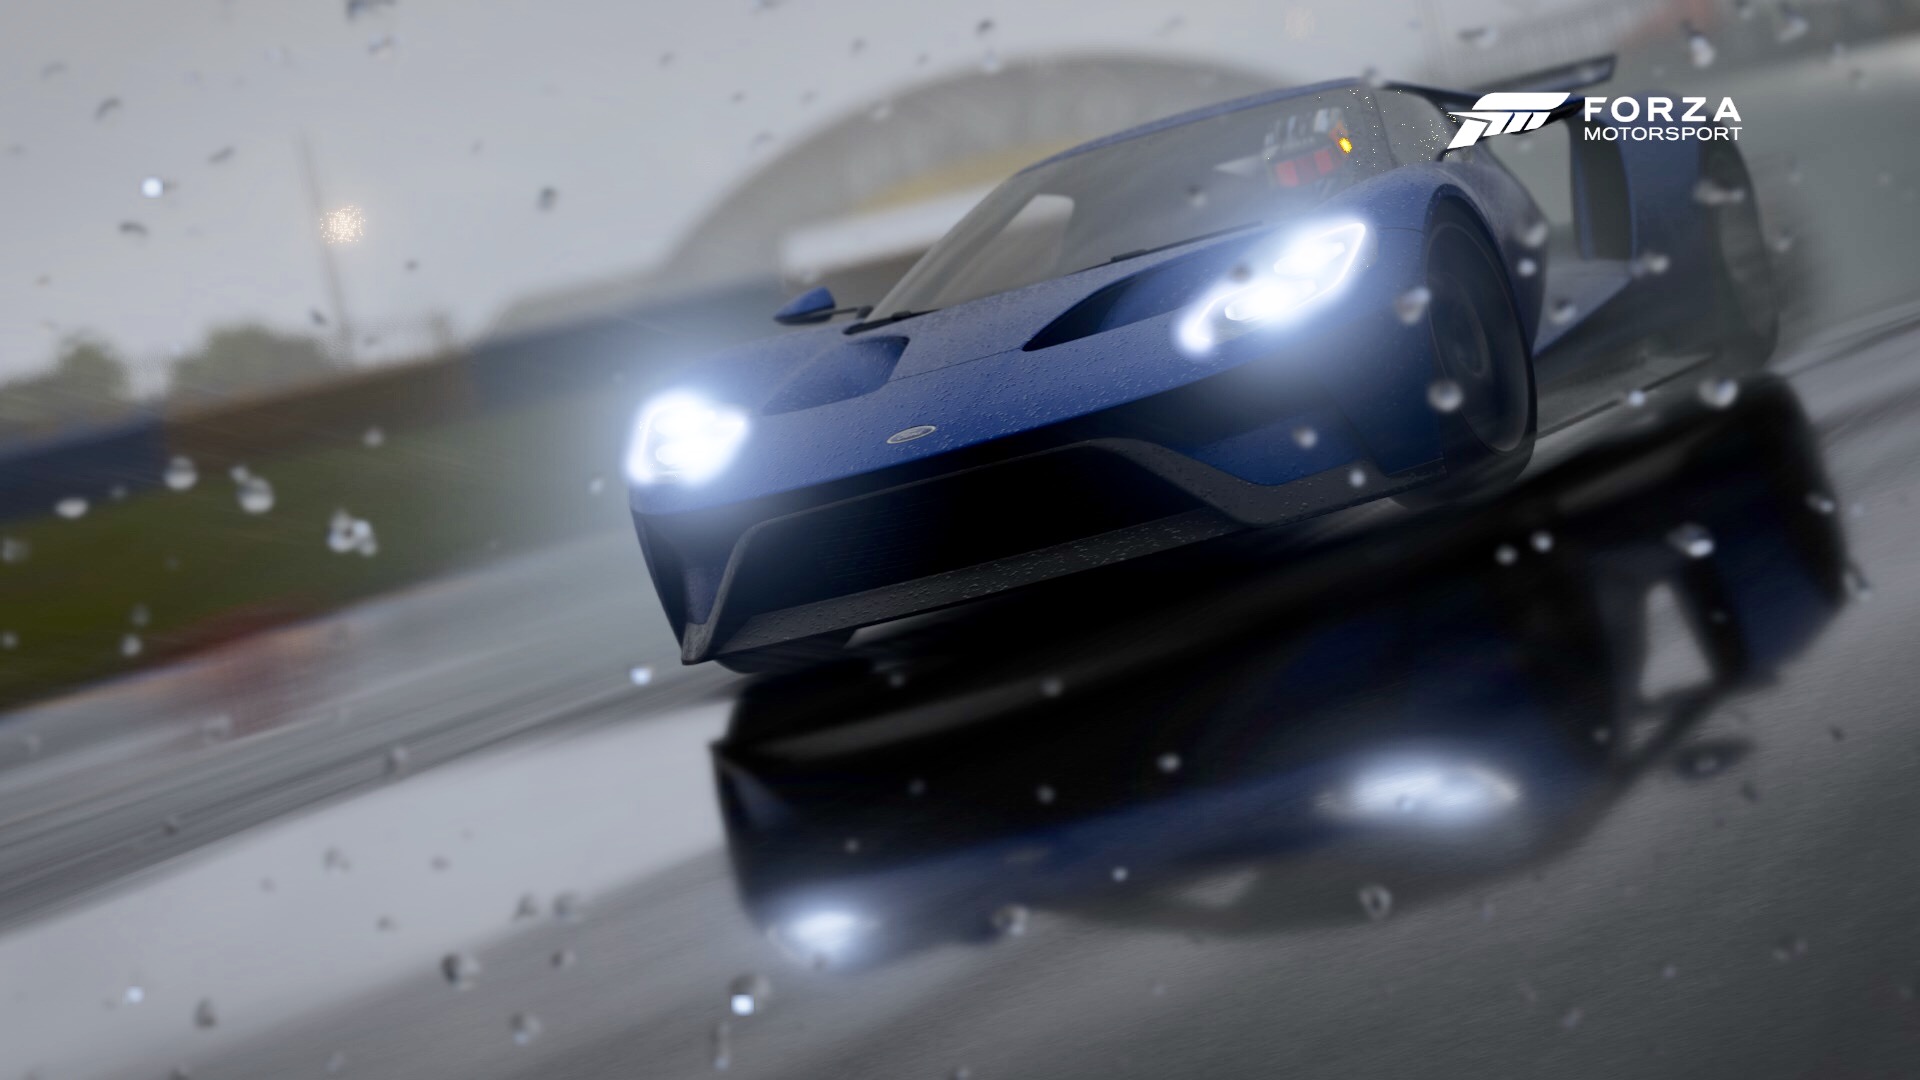 100+ Forza Motorsport 6 HD Wallpapers and Backgrounds